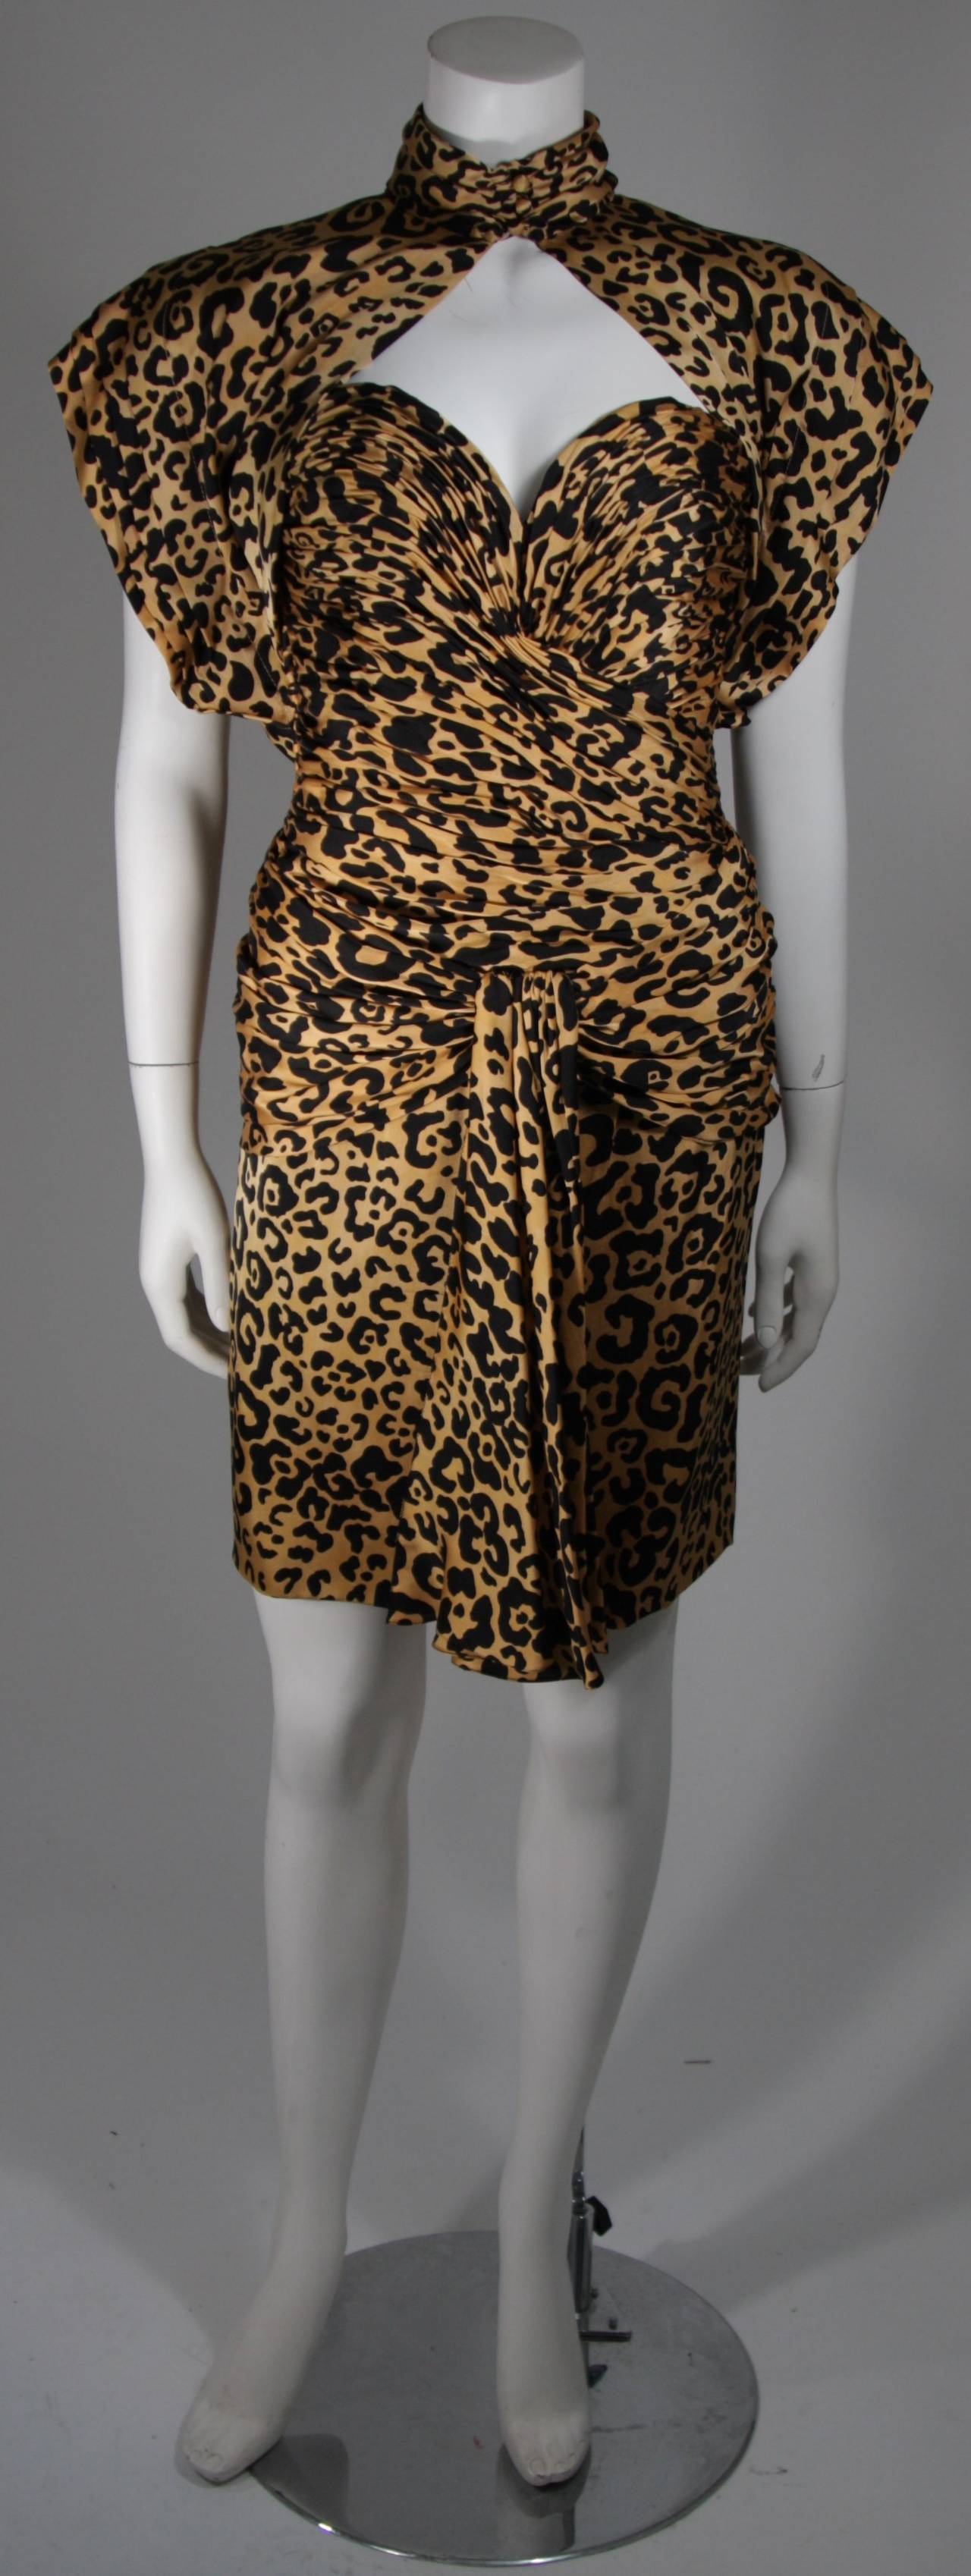 This Vicky Tiel ensemble is composed animal print silk in gold and black. The dress is a rouched drape style bustier dress with a side zipper. The caplet features a mock neck with buttons. Made in France. 

**Please cross-reference measurements